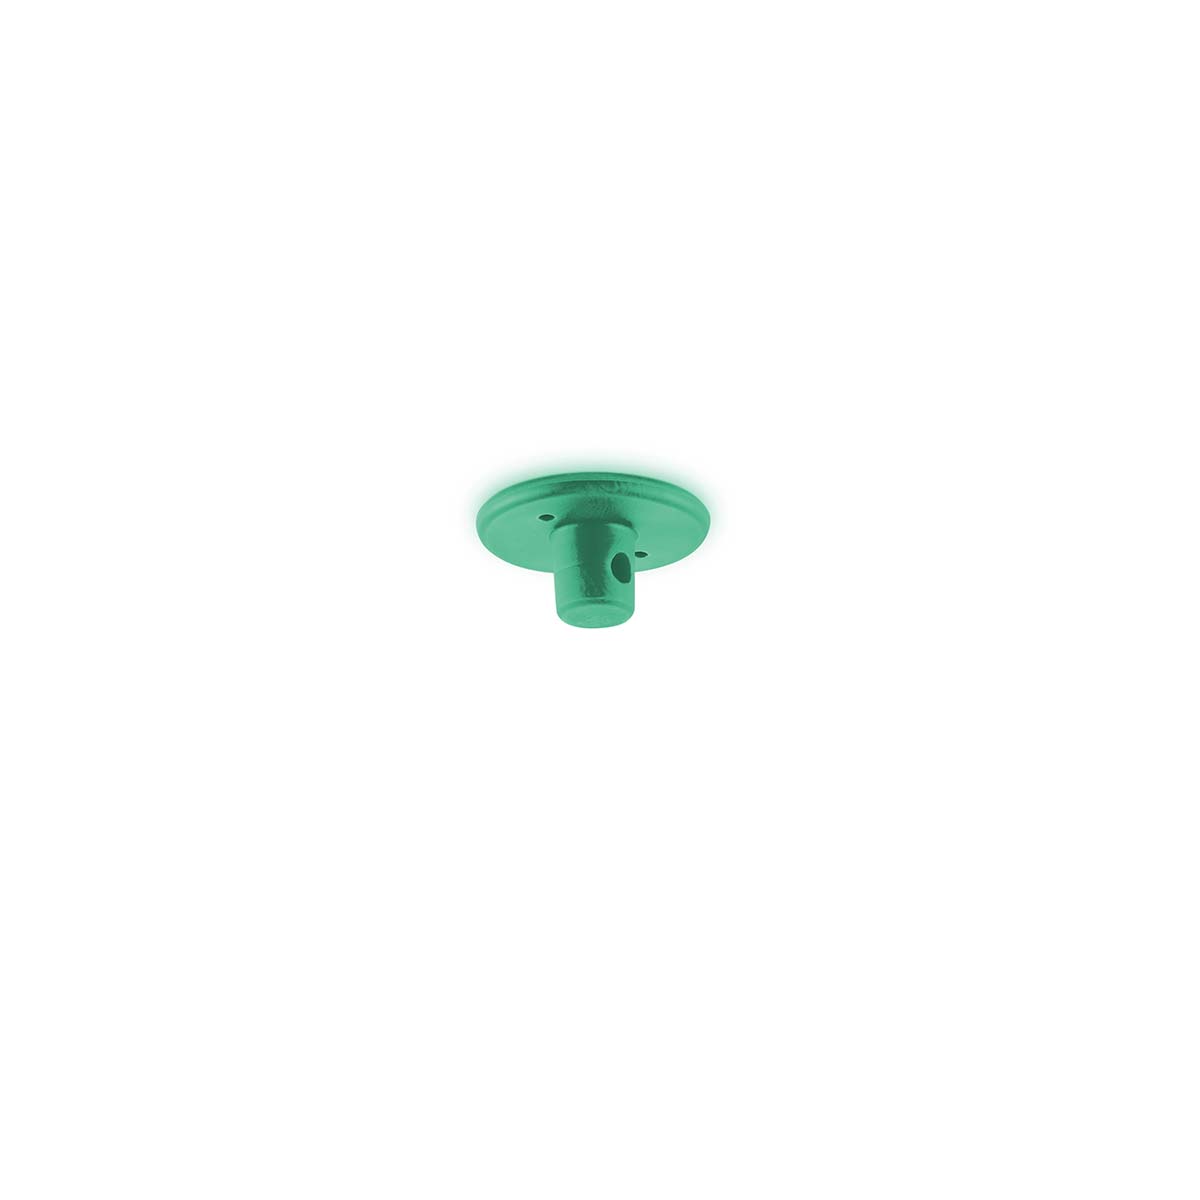 Tangla lighting - TLHG003LG - Silicone cable hanger - mix and match - lake green